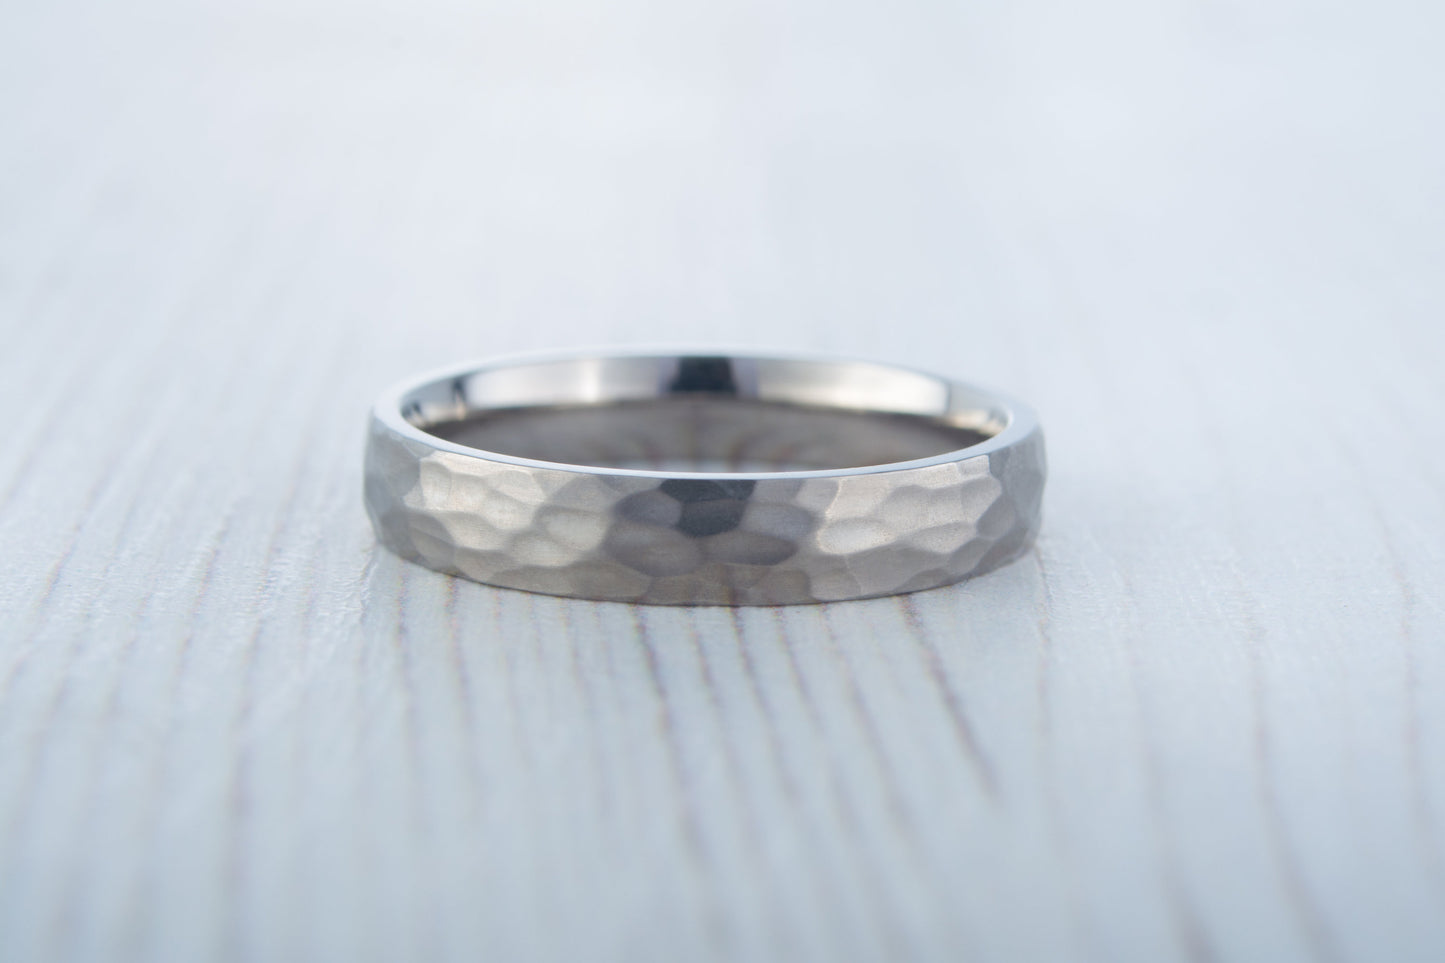 4mm Hammered finish Titanium Wedding ring band for men and women